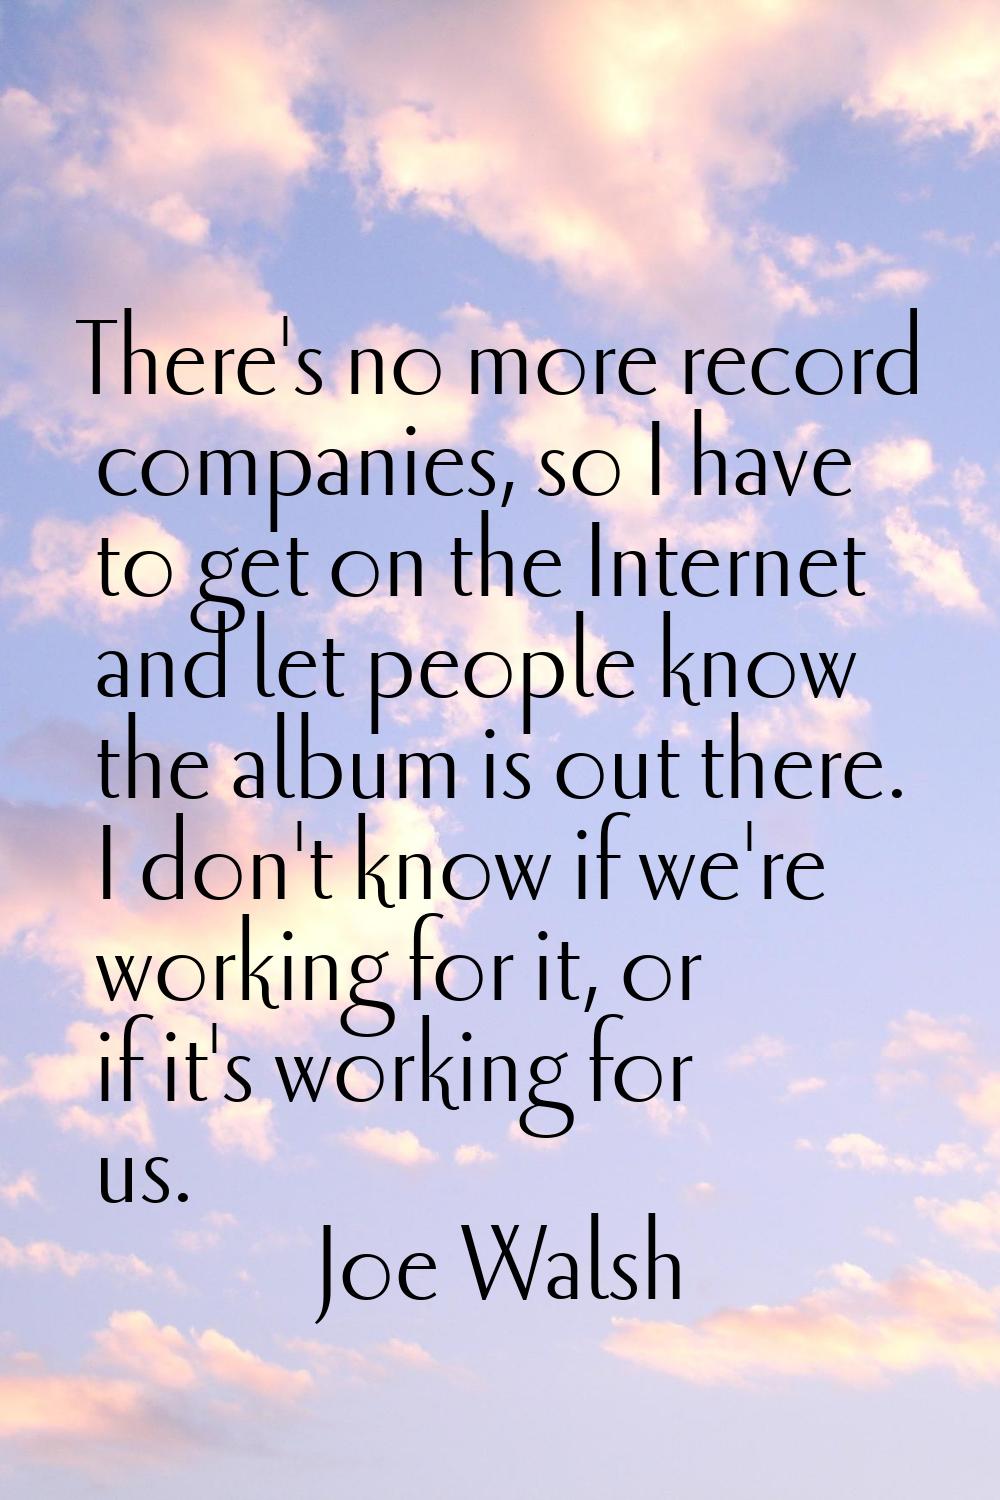 There's no more record companies, so I have to get on the Internet and let people know the album is